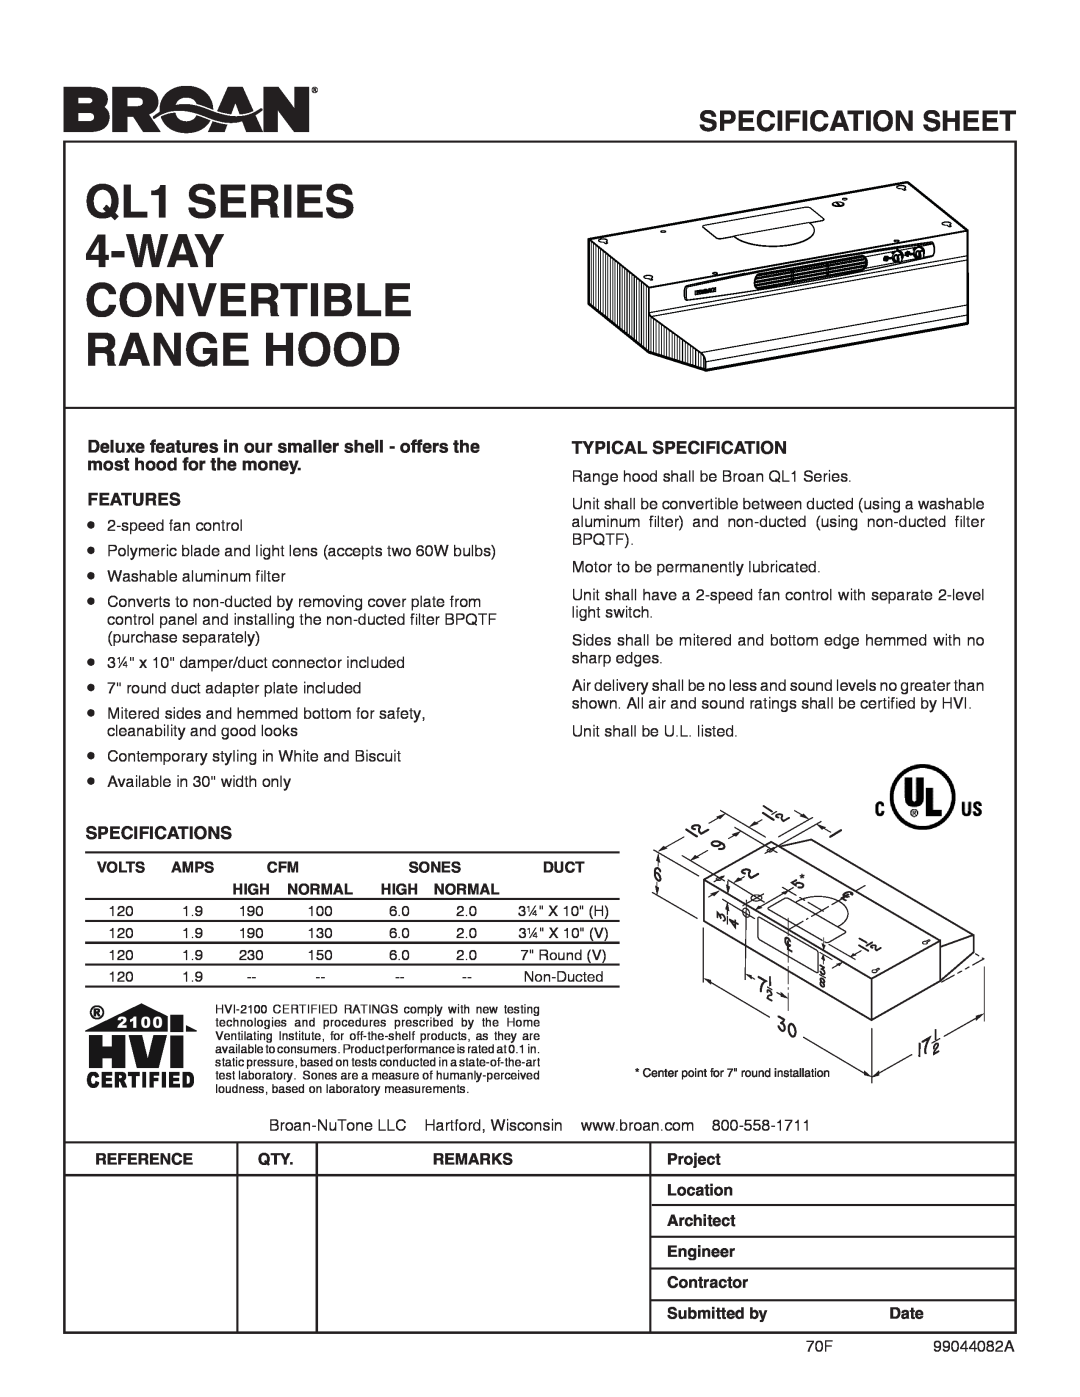 Broan QL1 Series specifications QL1 SERIES 4-WAYCONVERTIBLE RANGE HOOD, Specification Sheet, Typical Specification 